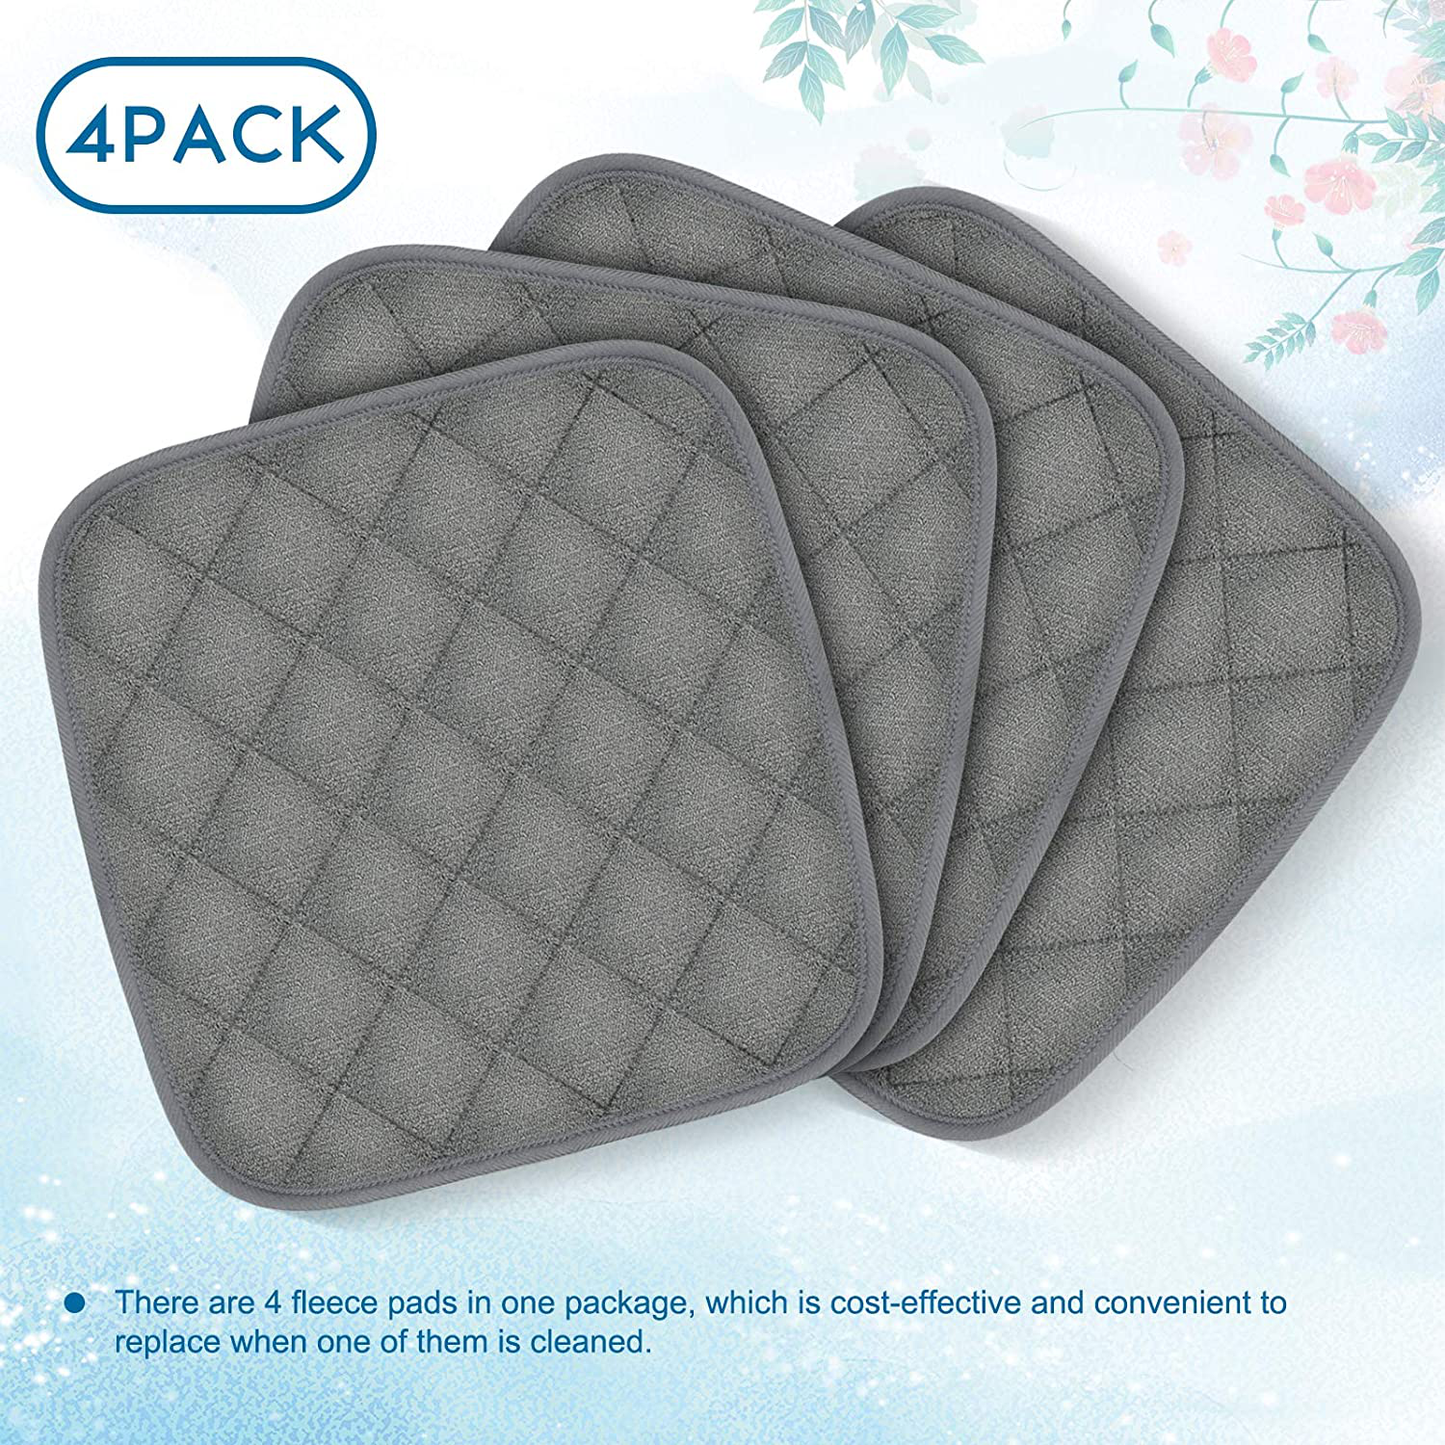 Rypet Guinea Pig Fleece Cage Liners - 4 Pack Washable Guinea Pig Pee Pads, Waterproof Reusable & anti Slip Guinea Pig Bedding Fast Absorbent Pee Pad for Small Animals 12"X 12" Animals & Pet Supplies > Pet Supplies > Small Animal Supplies > Small Animal Bedding Rypet   